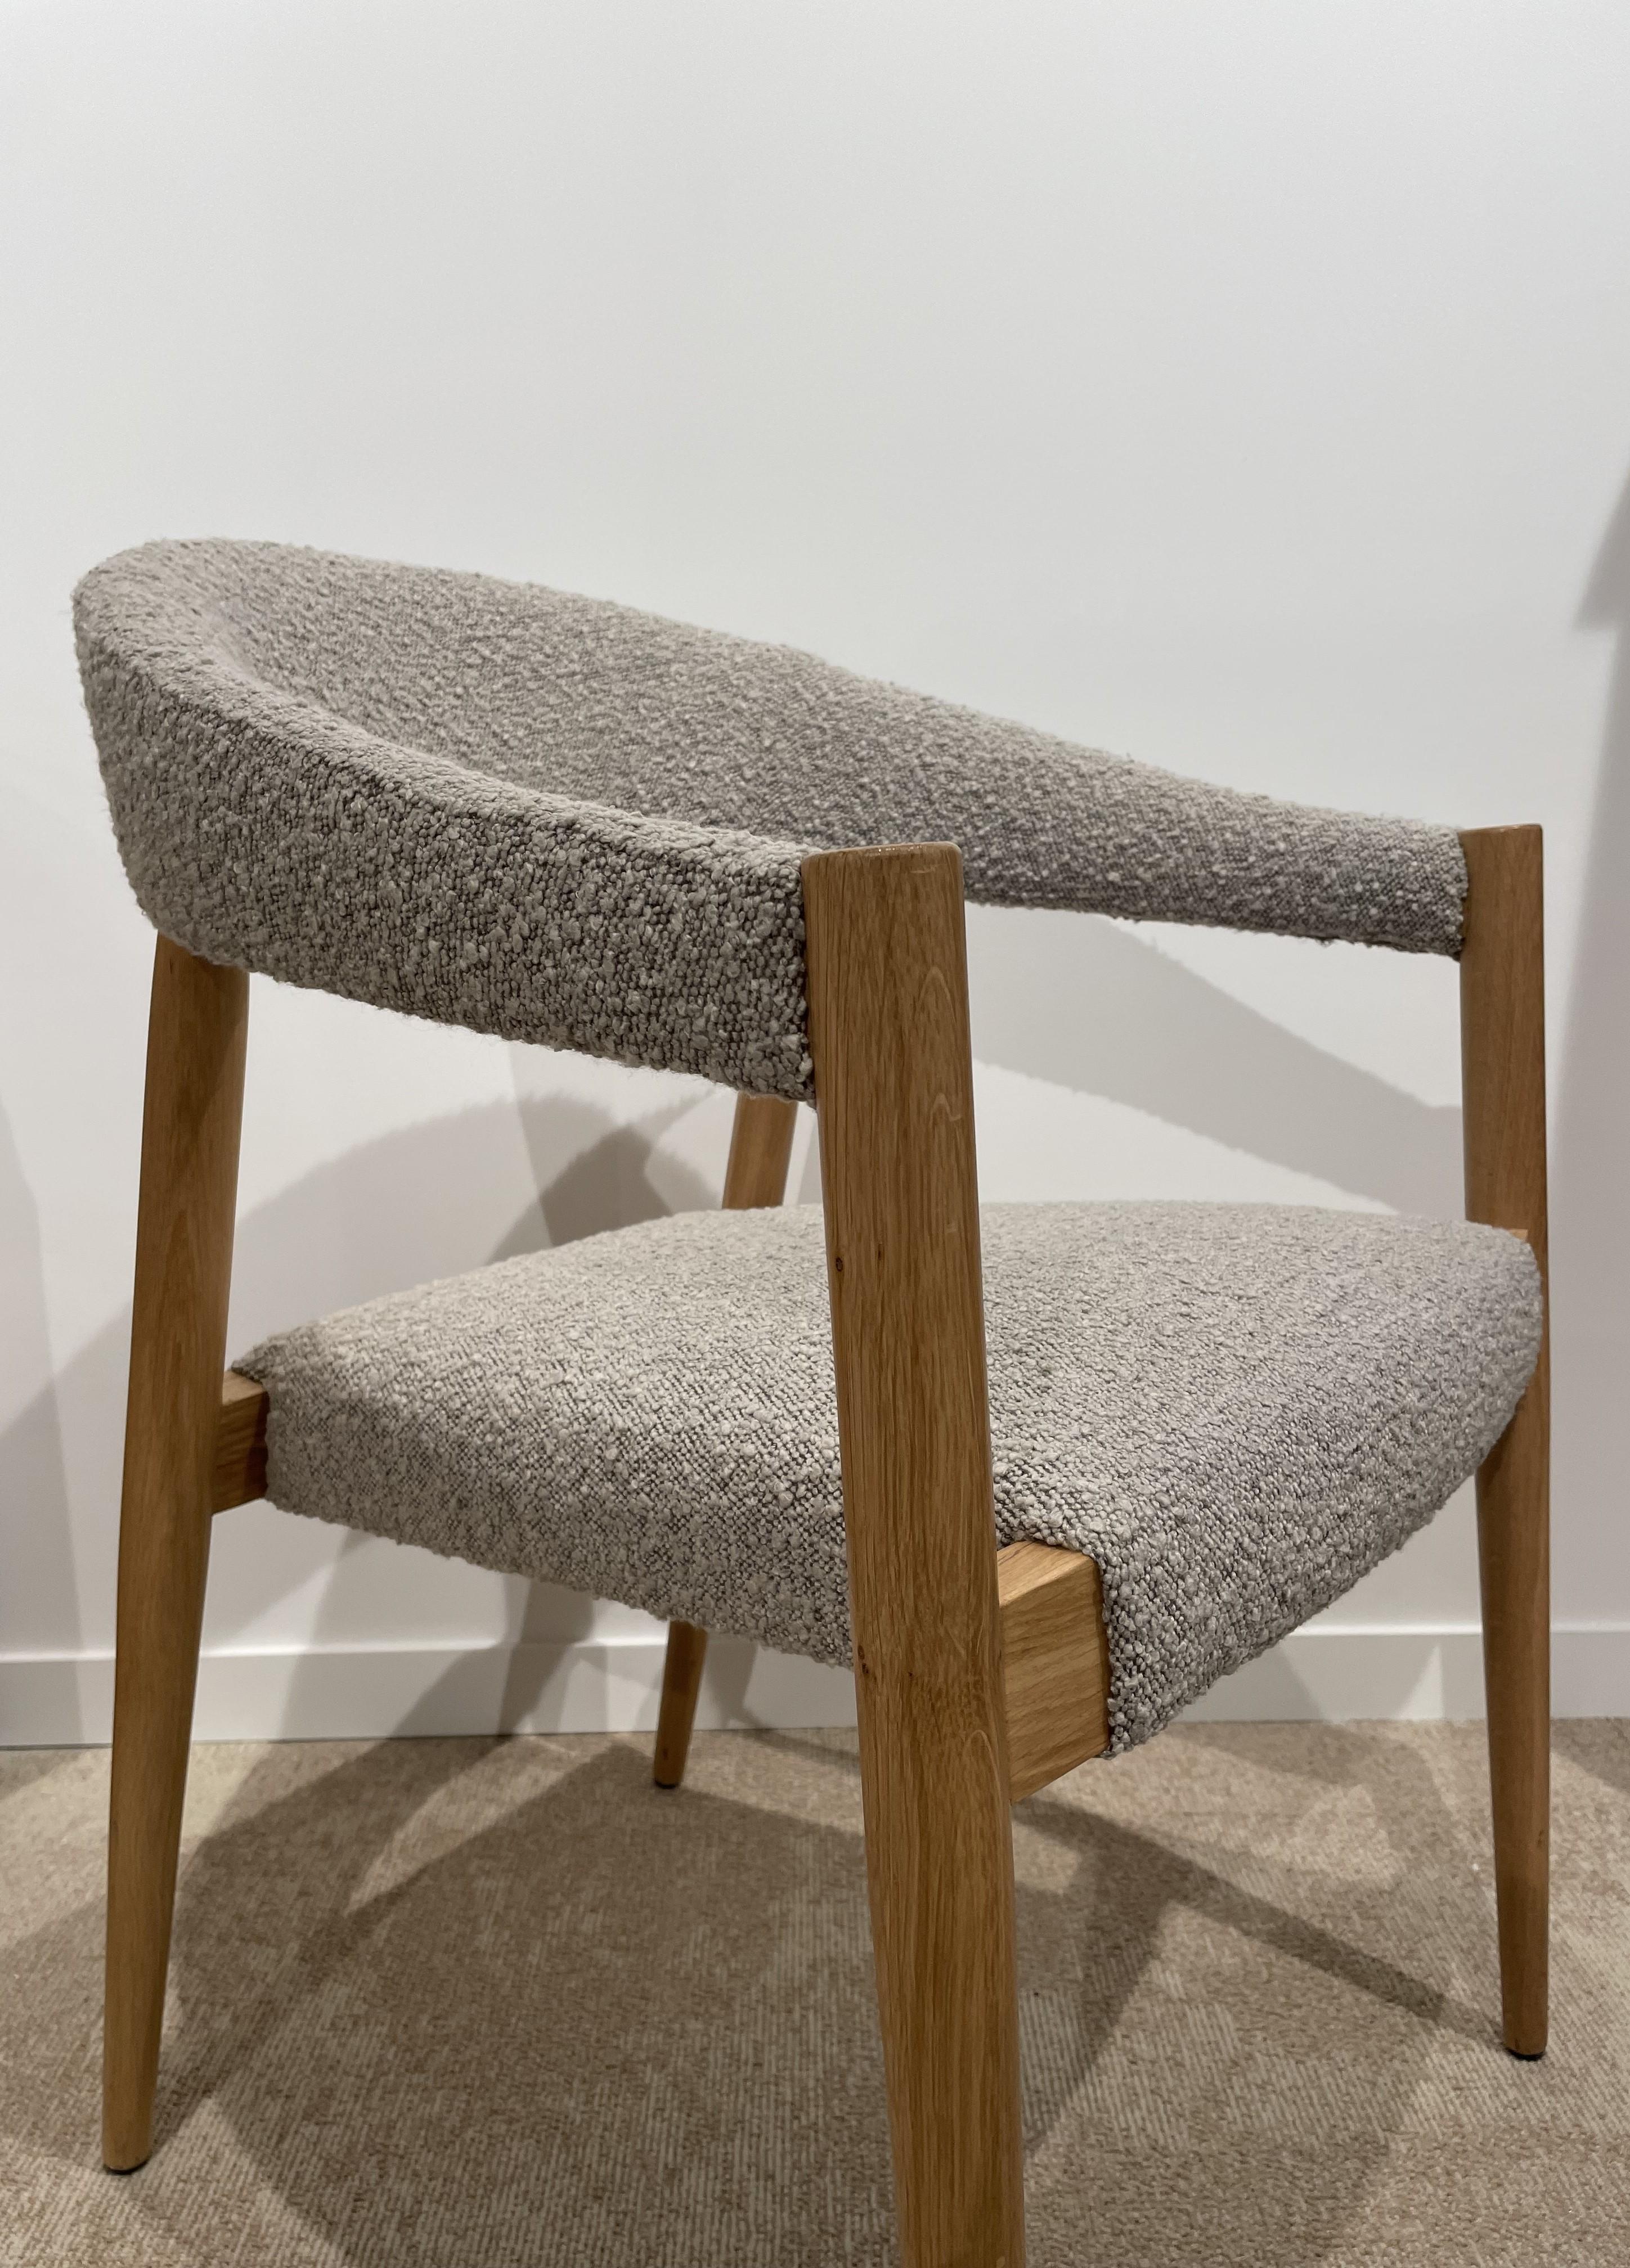 1960s Danish Design and Scandinavian Style Wooden and Bouclé Fabric Chair For Sale 11